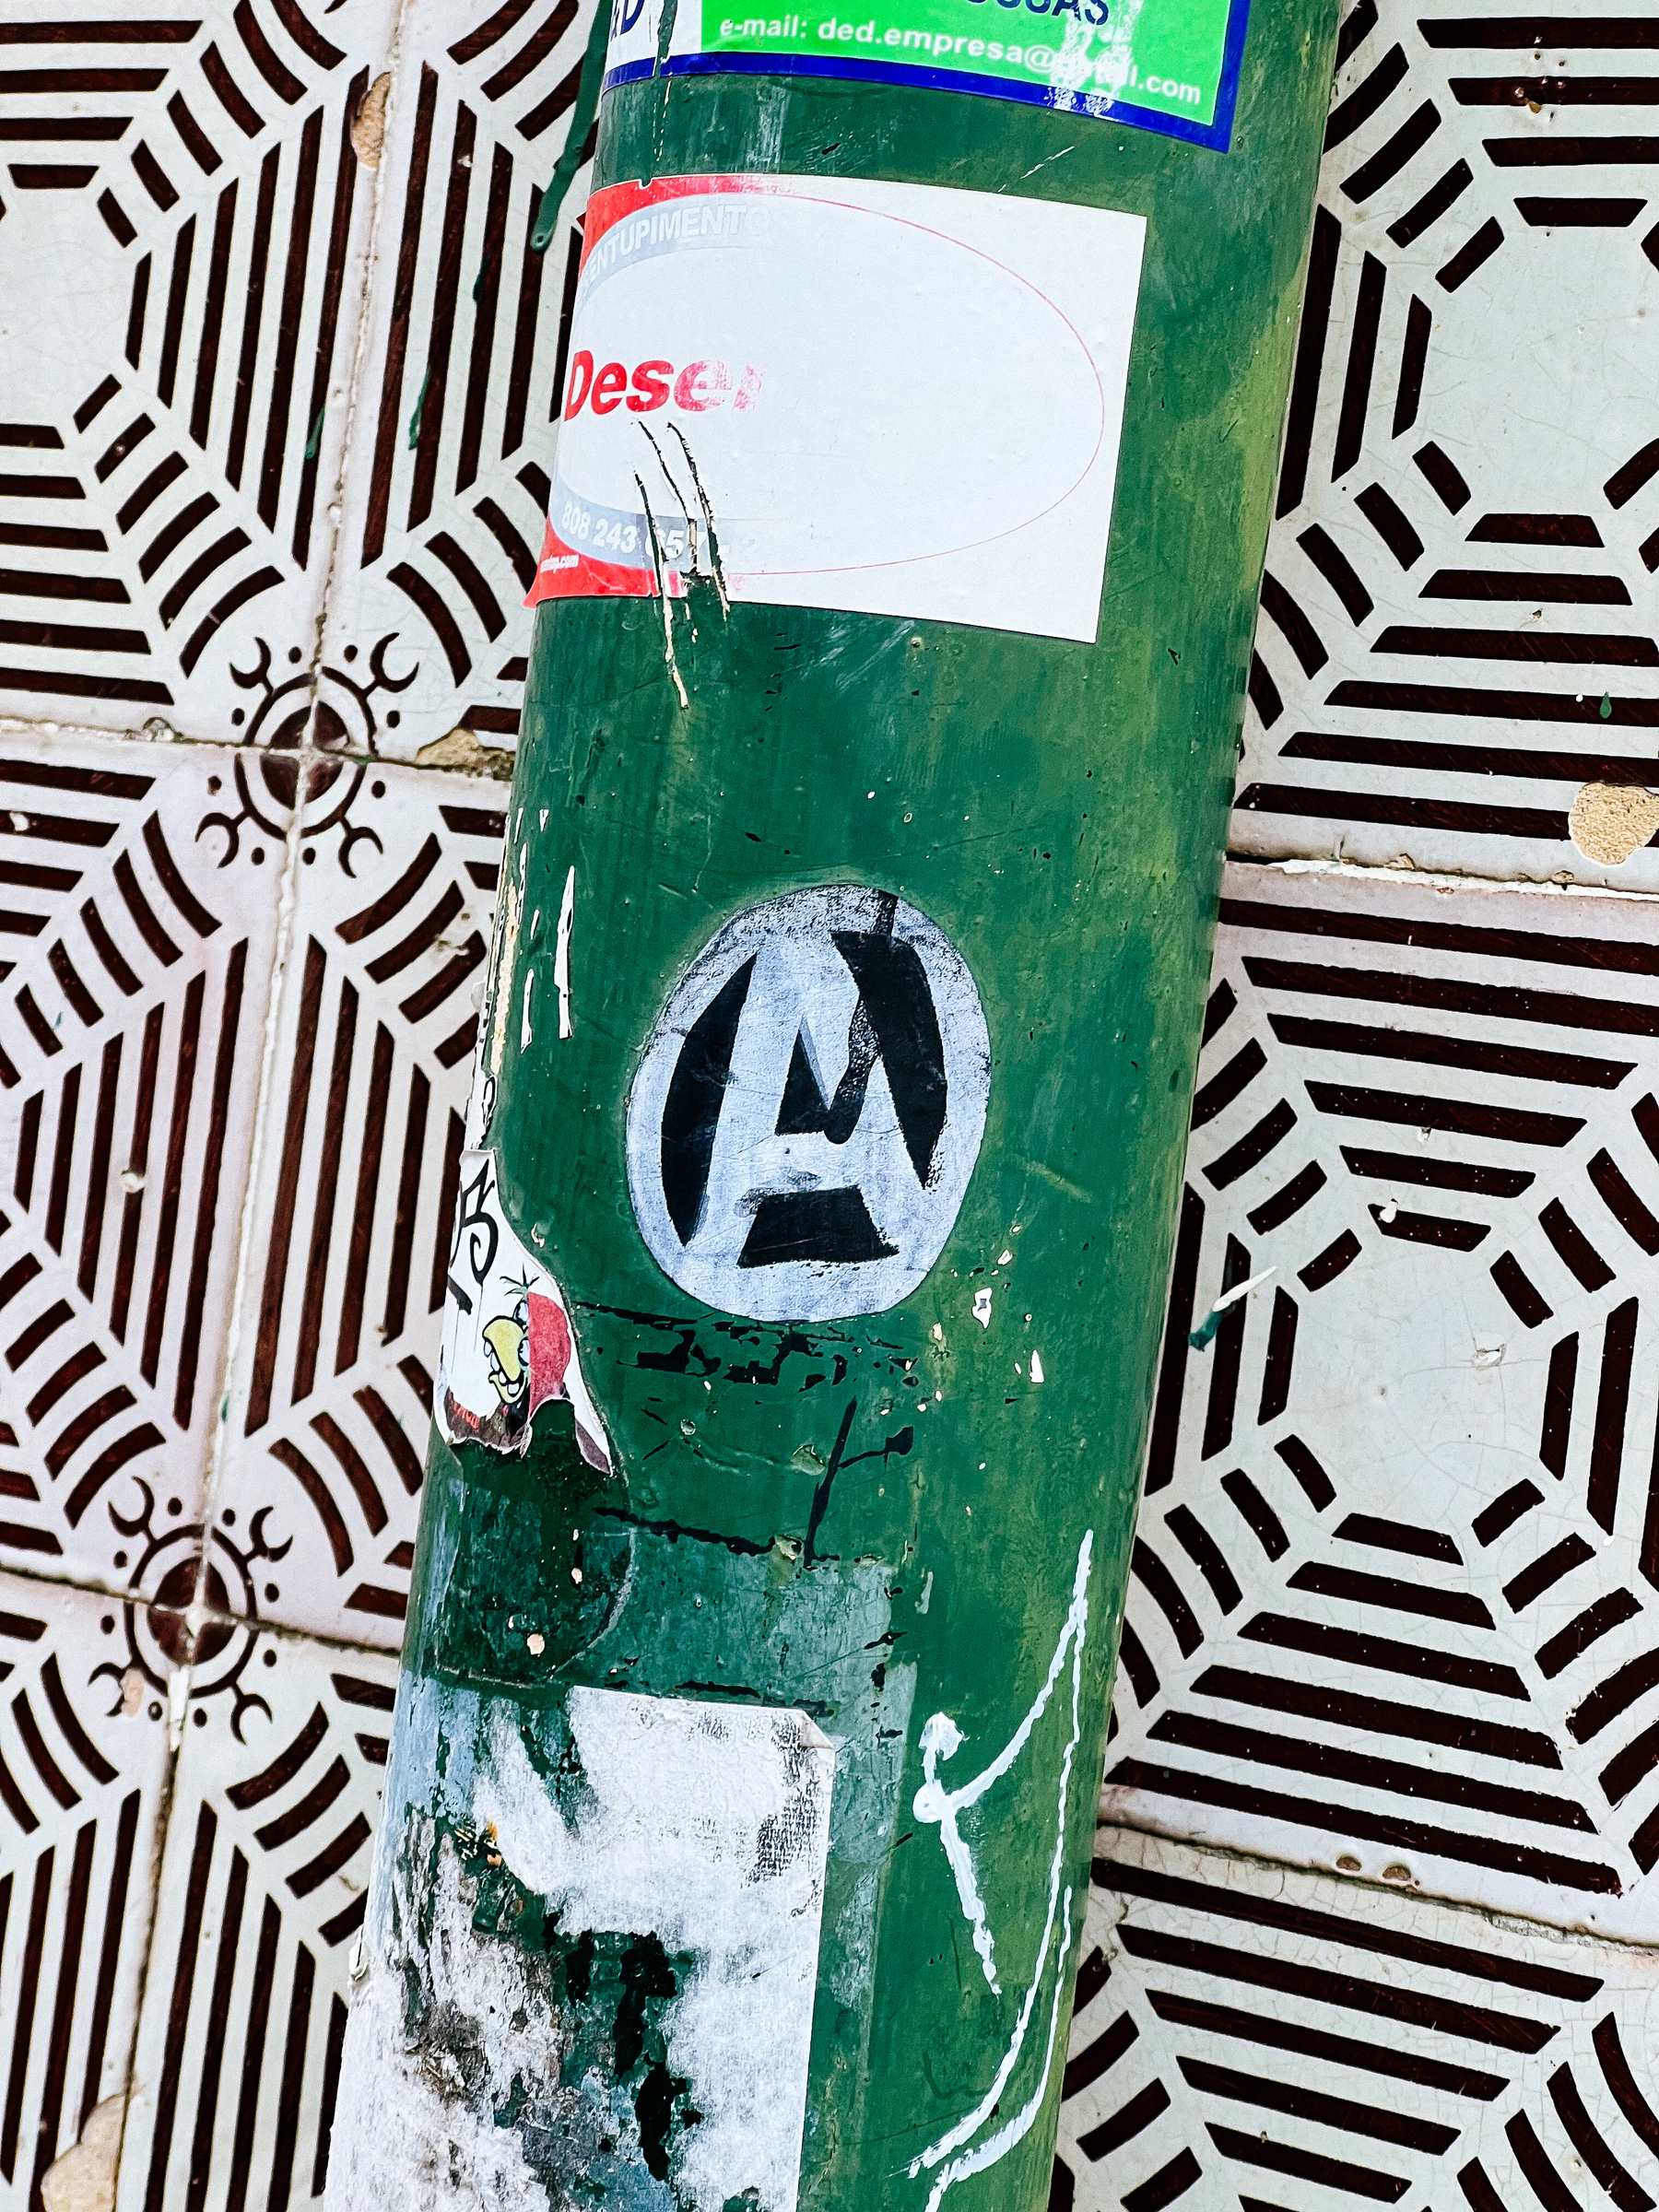 Anarchy. In a sticker. On a weathered green utility pole covered in layers of faded stickers, set against a backdrop of ornate, geometric-patterned tiles.